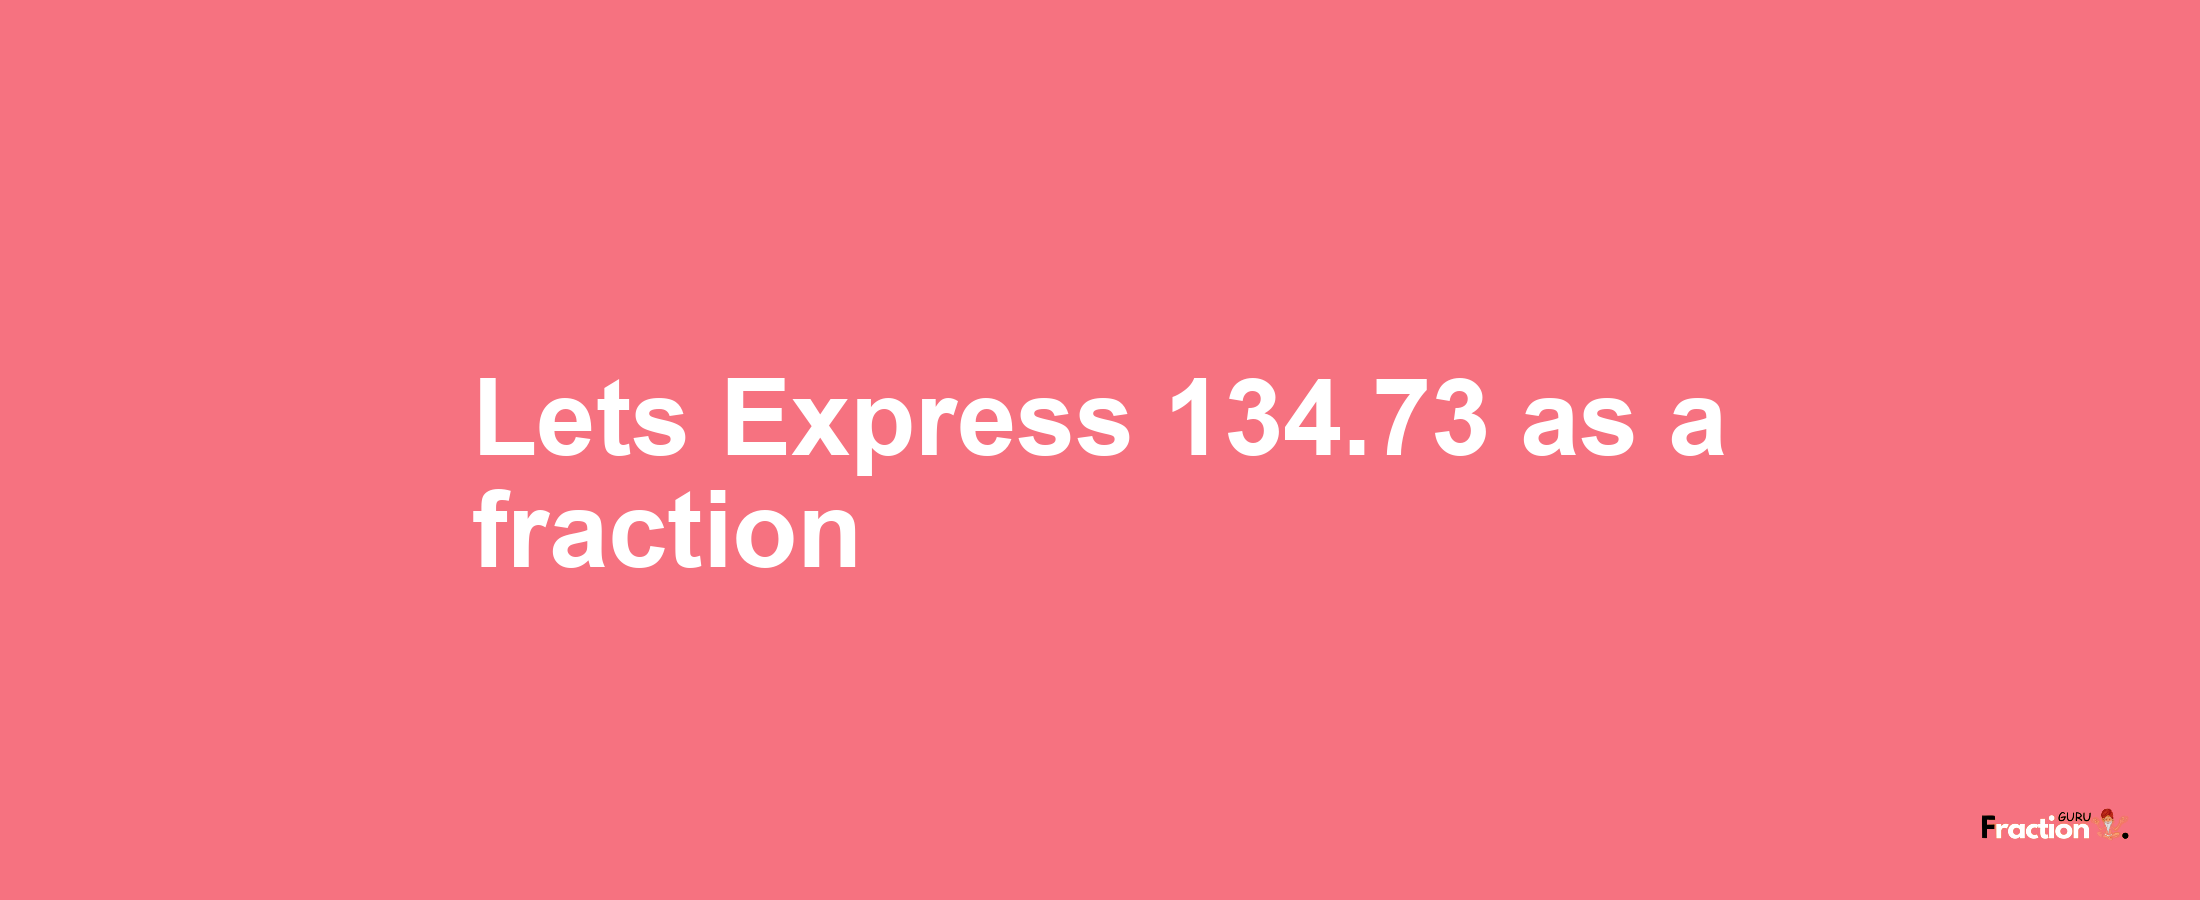 Lets Express 134.73 as afraction